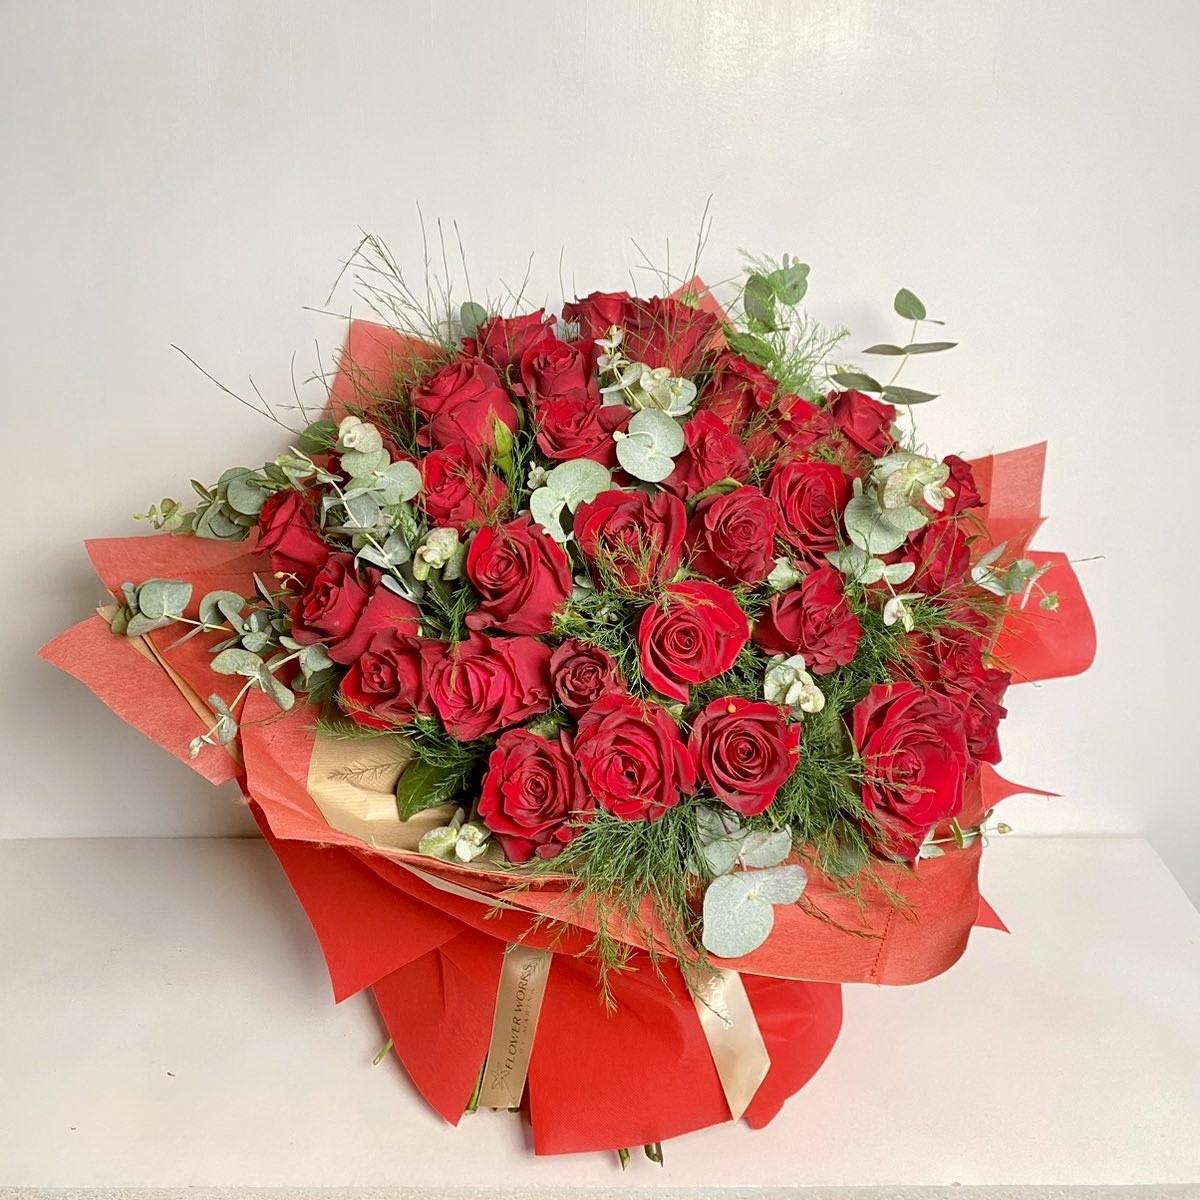 HUGE RED ROSES BOUQUET